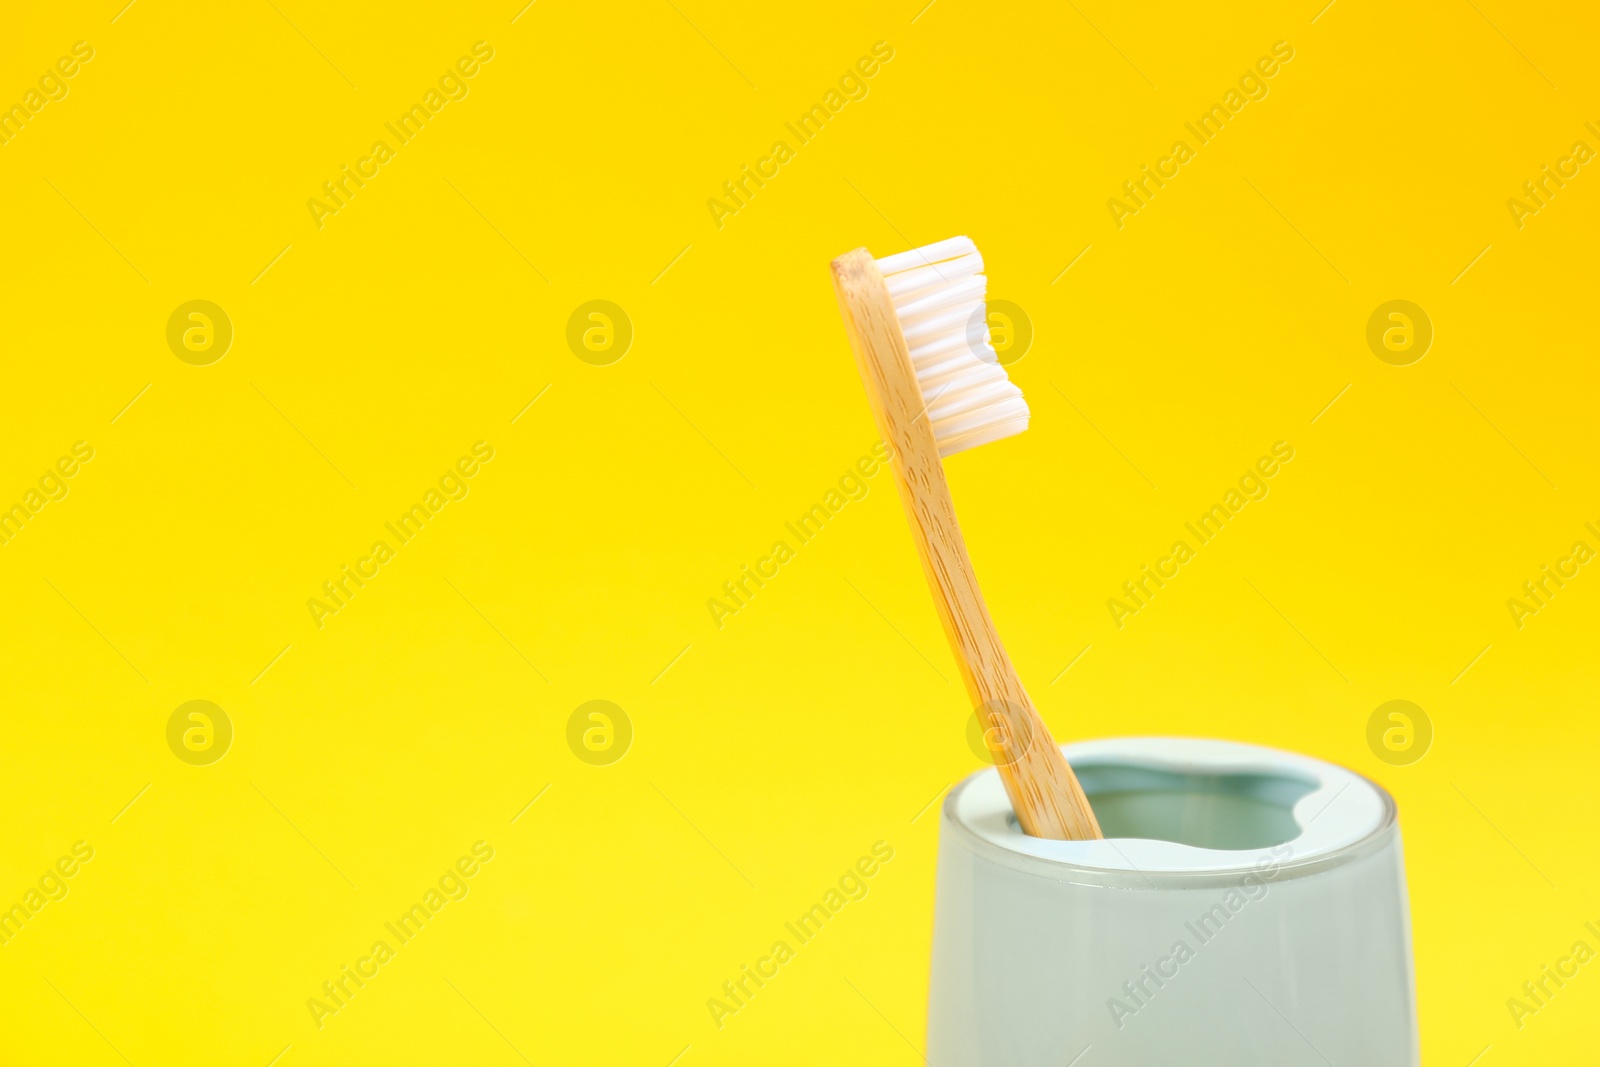 Photo of Toothbrush made of bamboo in holder on yellow background. Space for text